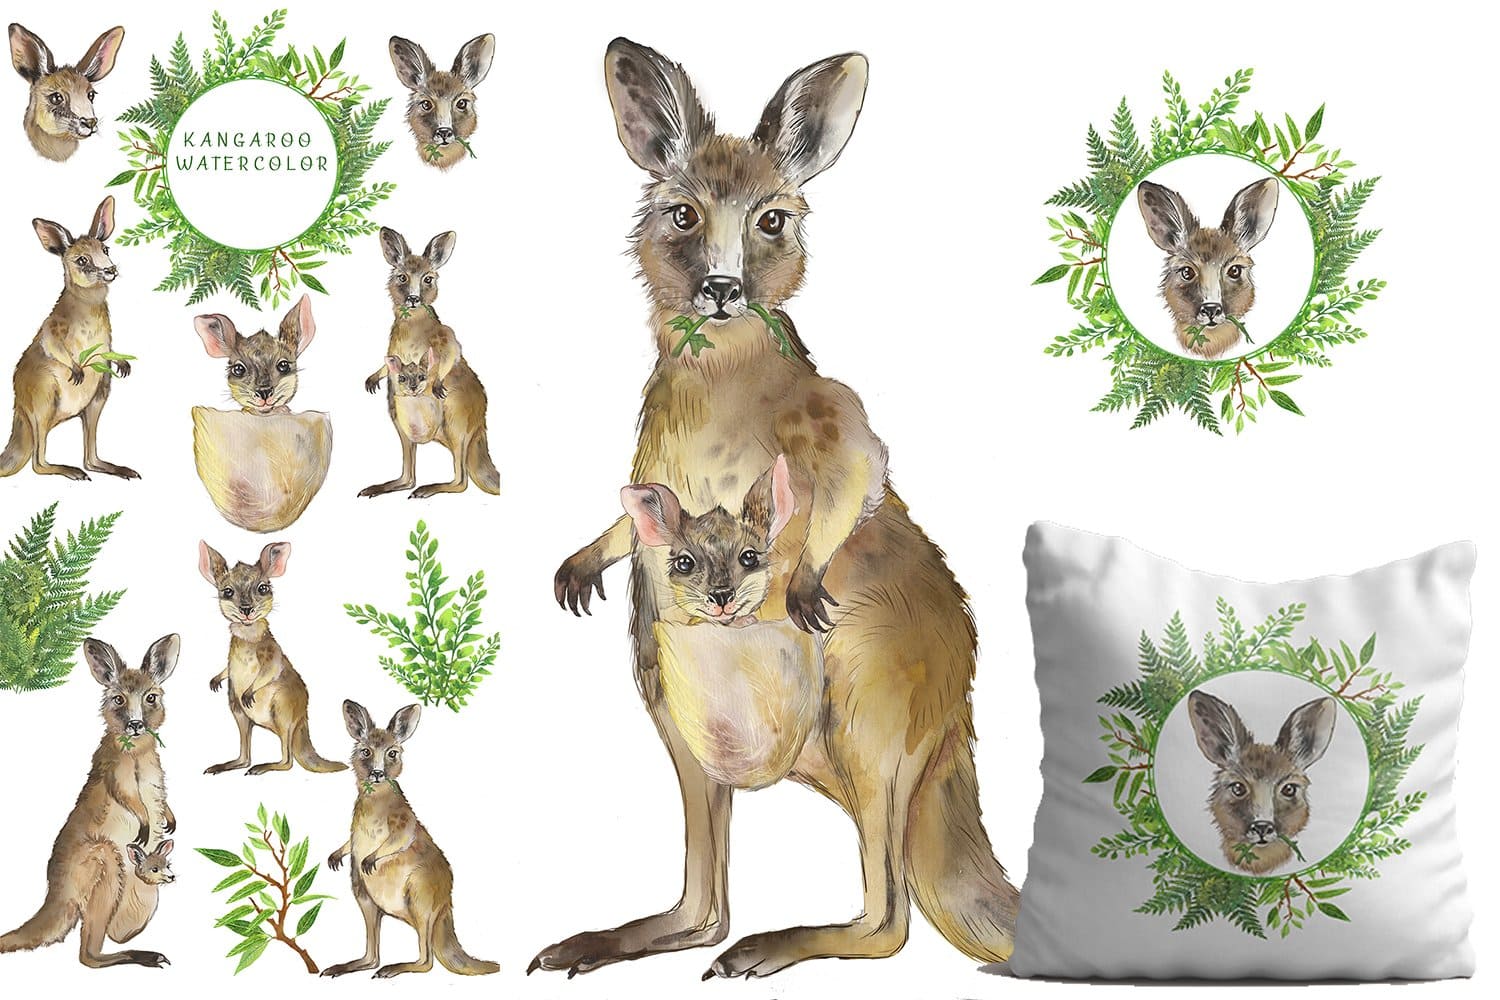 Family Kangaroo Watercolor Clipart preview image.